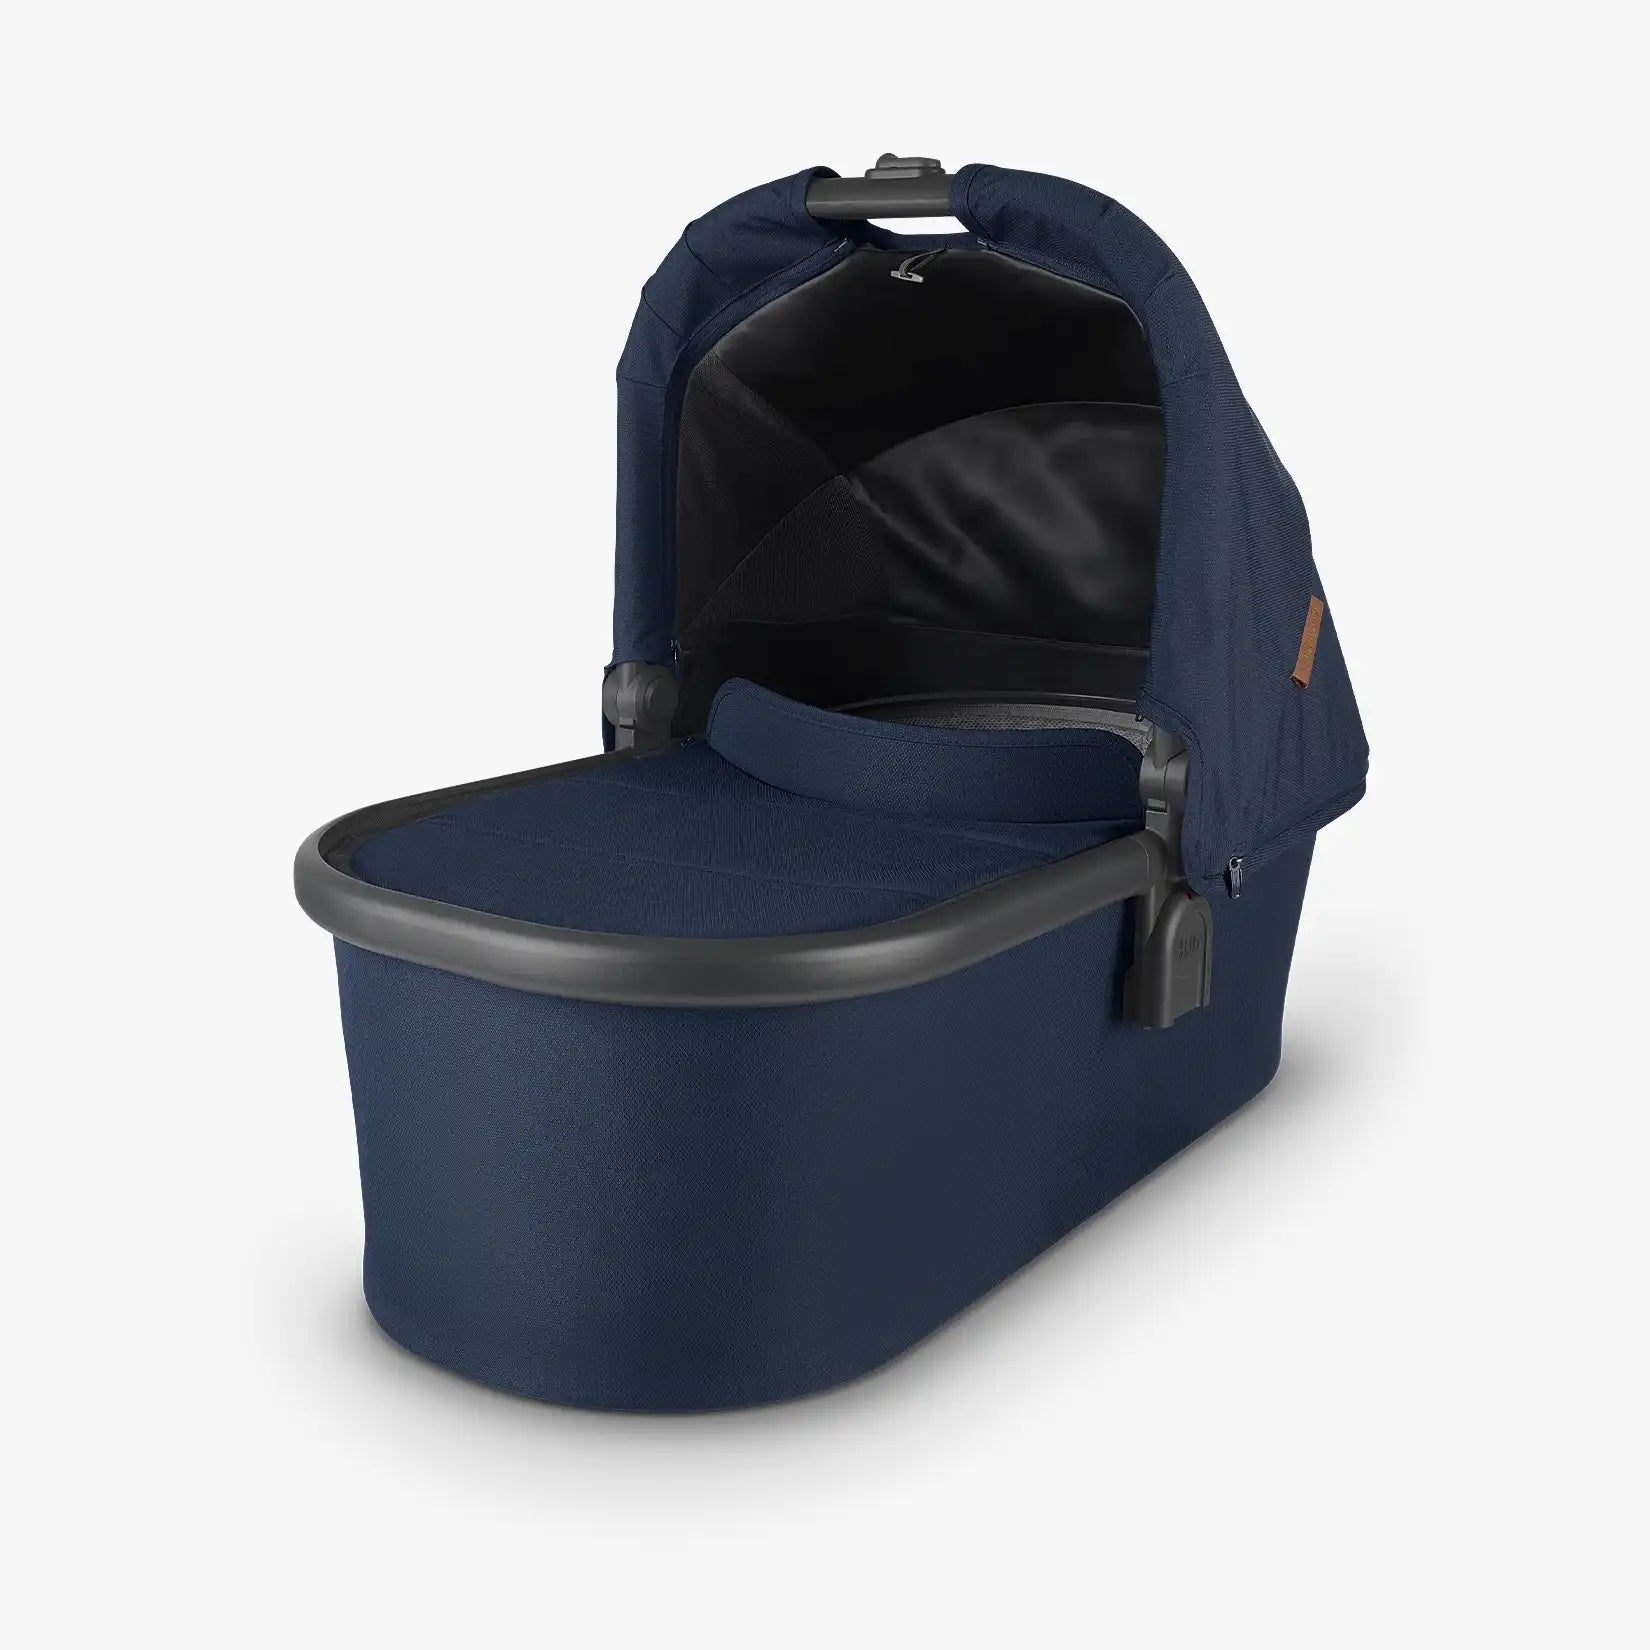 UPPAbaby Bassinet - ANB Baby -810030094623$100 - $300